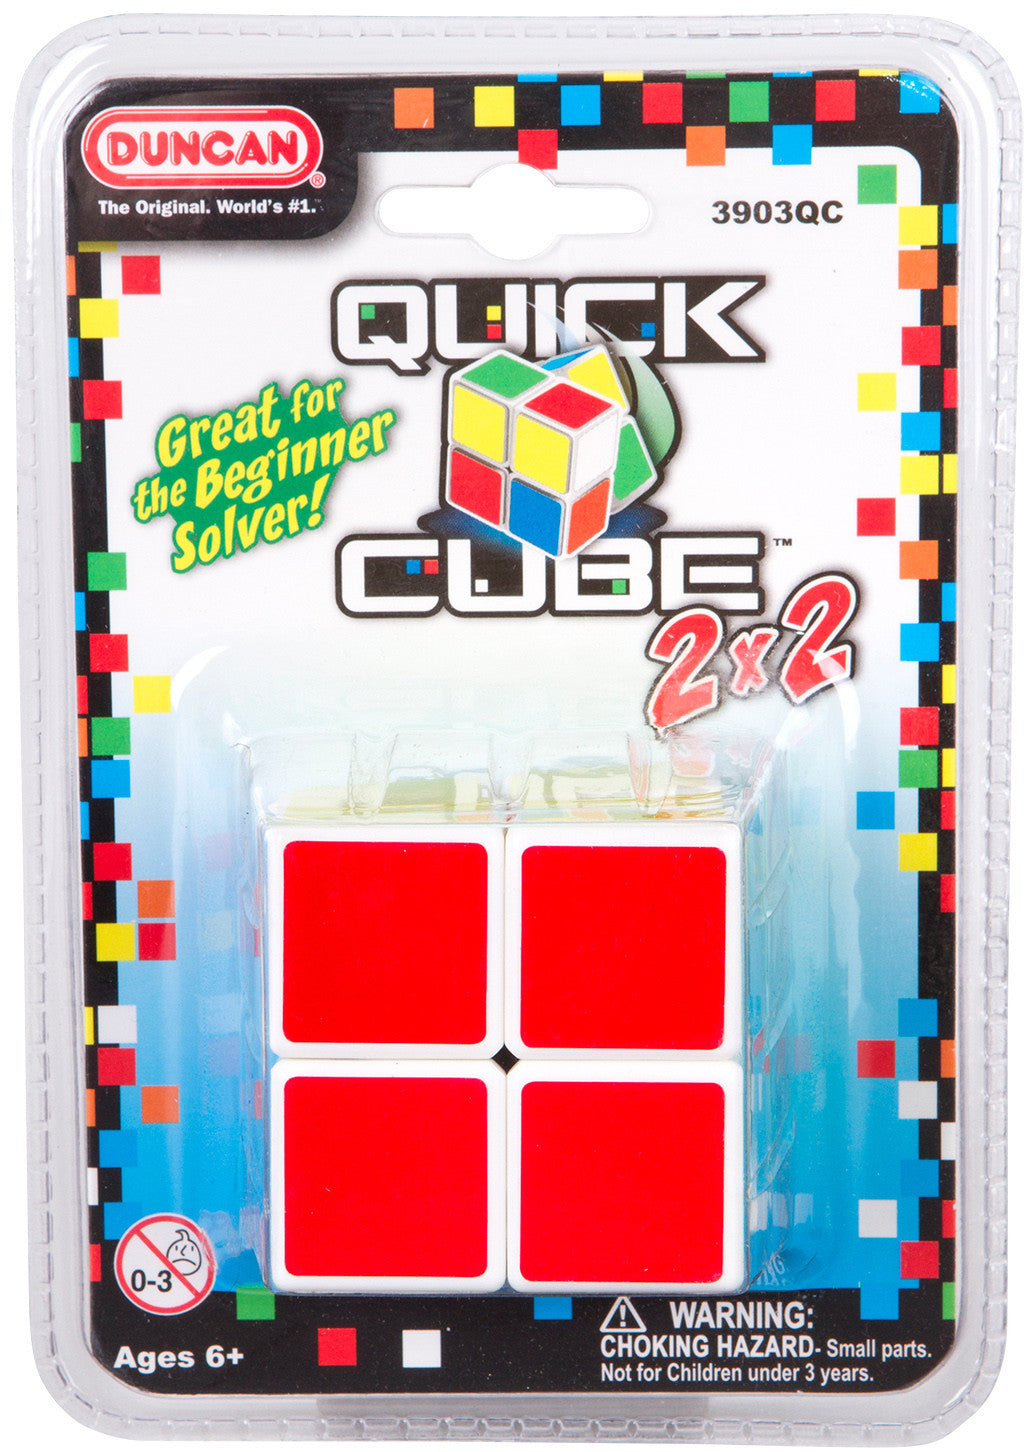 Duncan Quick Cube 2 x 2 - Toybox Tales